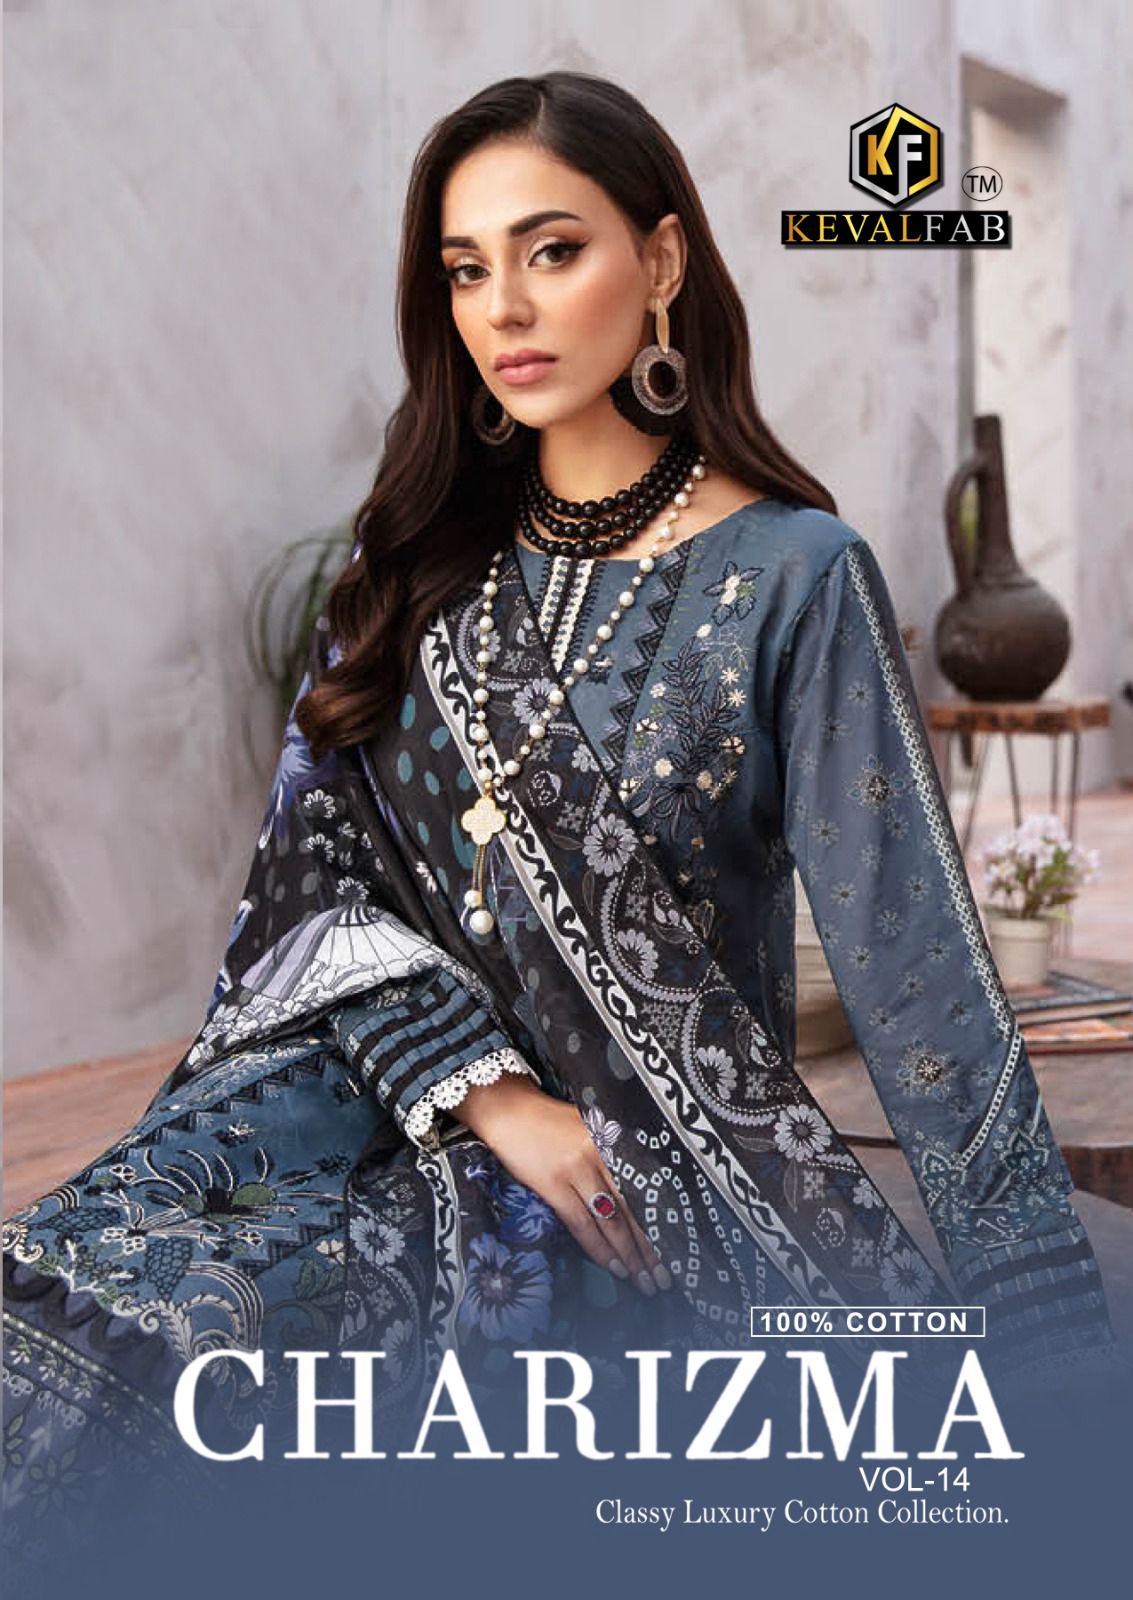 WHATSAPP BROADCAST LIST FOR FULL  CATALOGUE– SEND YOUR NAME AND LOCATION ON +91 9974 806 954  – FOR SALWAR KAMEEZ +91 9662 030 388  – FOR KURTIS +91 7069655500– FOR INQUIRY +918799402355 –PAKISTANI SUITS  SINGLE PIECE PEHNAVA FASHION MART IS INDIA'S BIGGEST WHOLESALER IN E COMMERCE PEHNAVA FASHION MART IS WHOLESALER, MANUFACTURER AND SUPPLIER FOR BRANDED PAKISTANI SUITS, INDIAN SALWAR KAMEEZ, LAWN SALWAR KAMEEZ, KARACHI PRINTED SALWAR KAMEEZ, LUXURY PRET OUTFIT, LUXURY PRET KURTIS, PAKISTANI READYMADE KURTIS, DESIGNER KURTIS, FANCY LONG GOWN, LATEST LEHENGHA CHOLI, PATIYALA COTTON KURTI, HEAVY EMBROIDEREY SUITS, PAKISTANI SALWAR SUITS, DIGITAL PRINTED KURTI with PANT, FANCY SHORT TOPS, FANCY TUNIC, PAKISTANI KURTI PANT, KASHMIRI PRINTED SUITS, SHARARA SUITS, FANCY KUTIS PANT WITH DUPATTA, JUMPSUIT, FANCY STOLES, KHADI EMBROIDERY WOLLEN DUPATTAS, DIGITAL PRINTED SUITS, ANARKALI SUITS, SALWAR KAMEEZ, KARACHI SUITS, LEGGINGS, PALAZZO, COTTON DRESS, FROCK TYPE LONG KURTIS, BRANDED DESIGNER COLLECTION, DENIM KURTIS, PARTY WEAR SUITS, TOP SHARARA WITH DUPATTA, EMBROIDERY SALWAR SUITS, COTTON SUITS AND ALL SURAT BRANDED CATALOGS